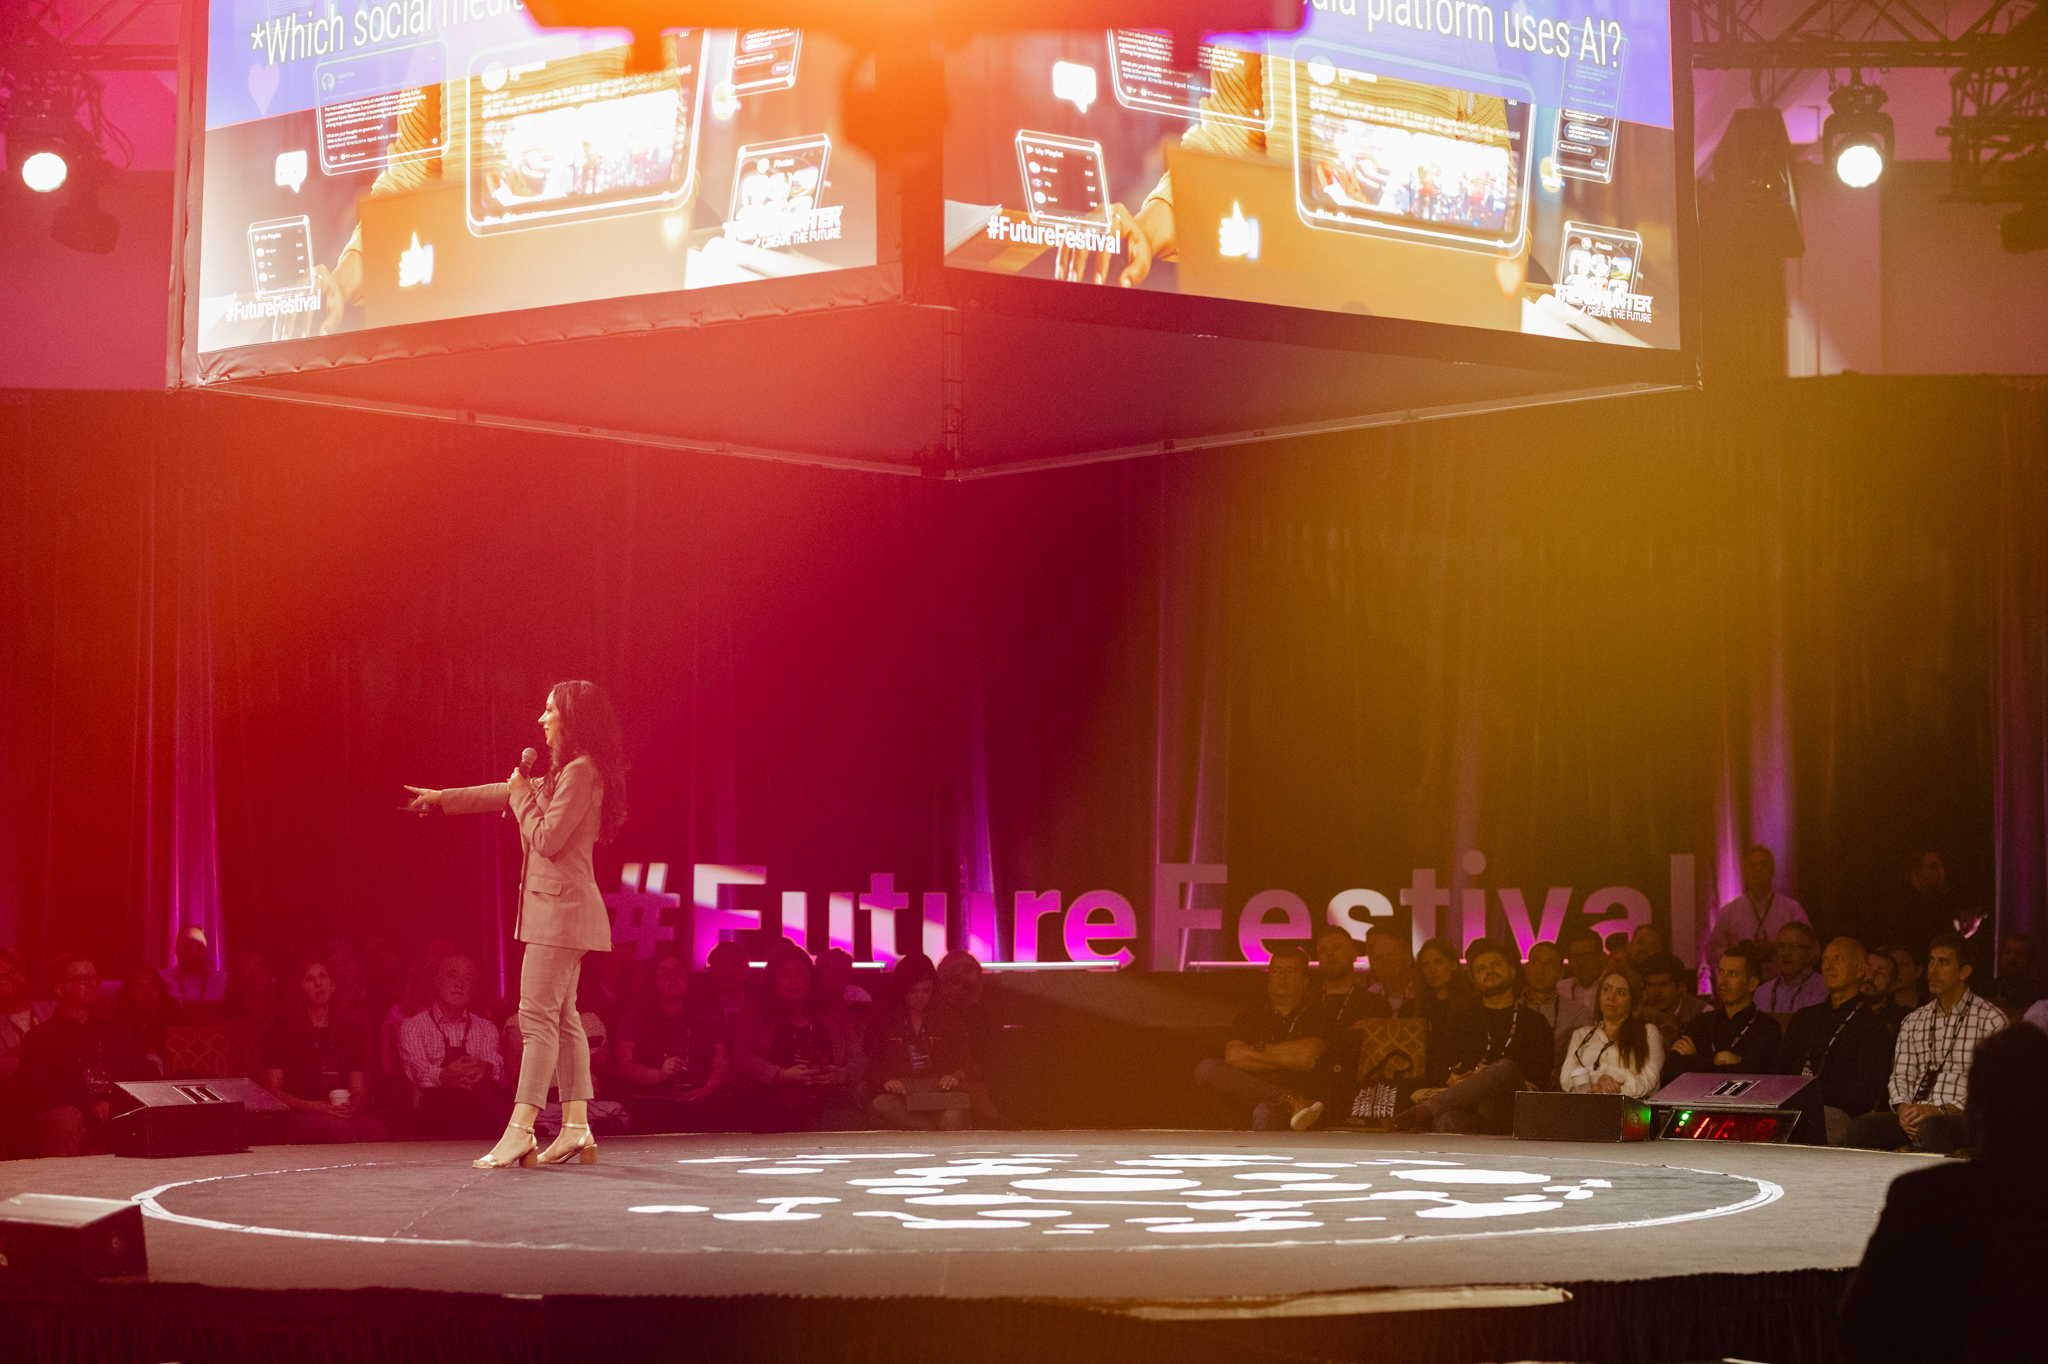 An event photographer capturing a woman standing on stage in front of a large screen.